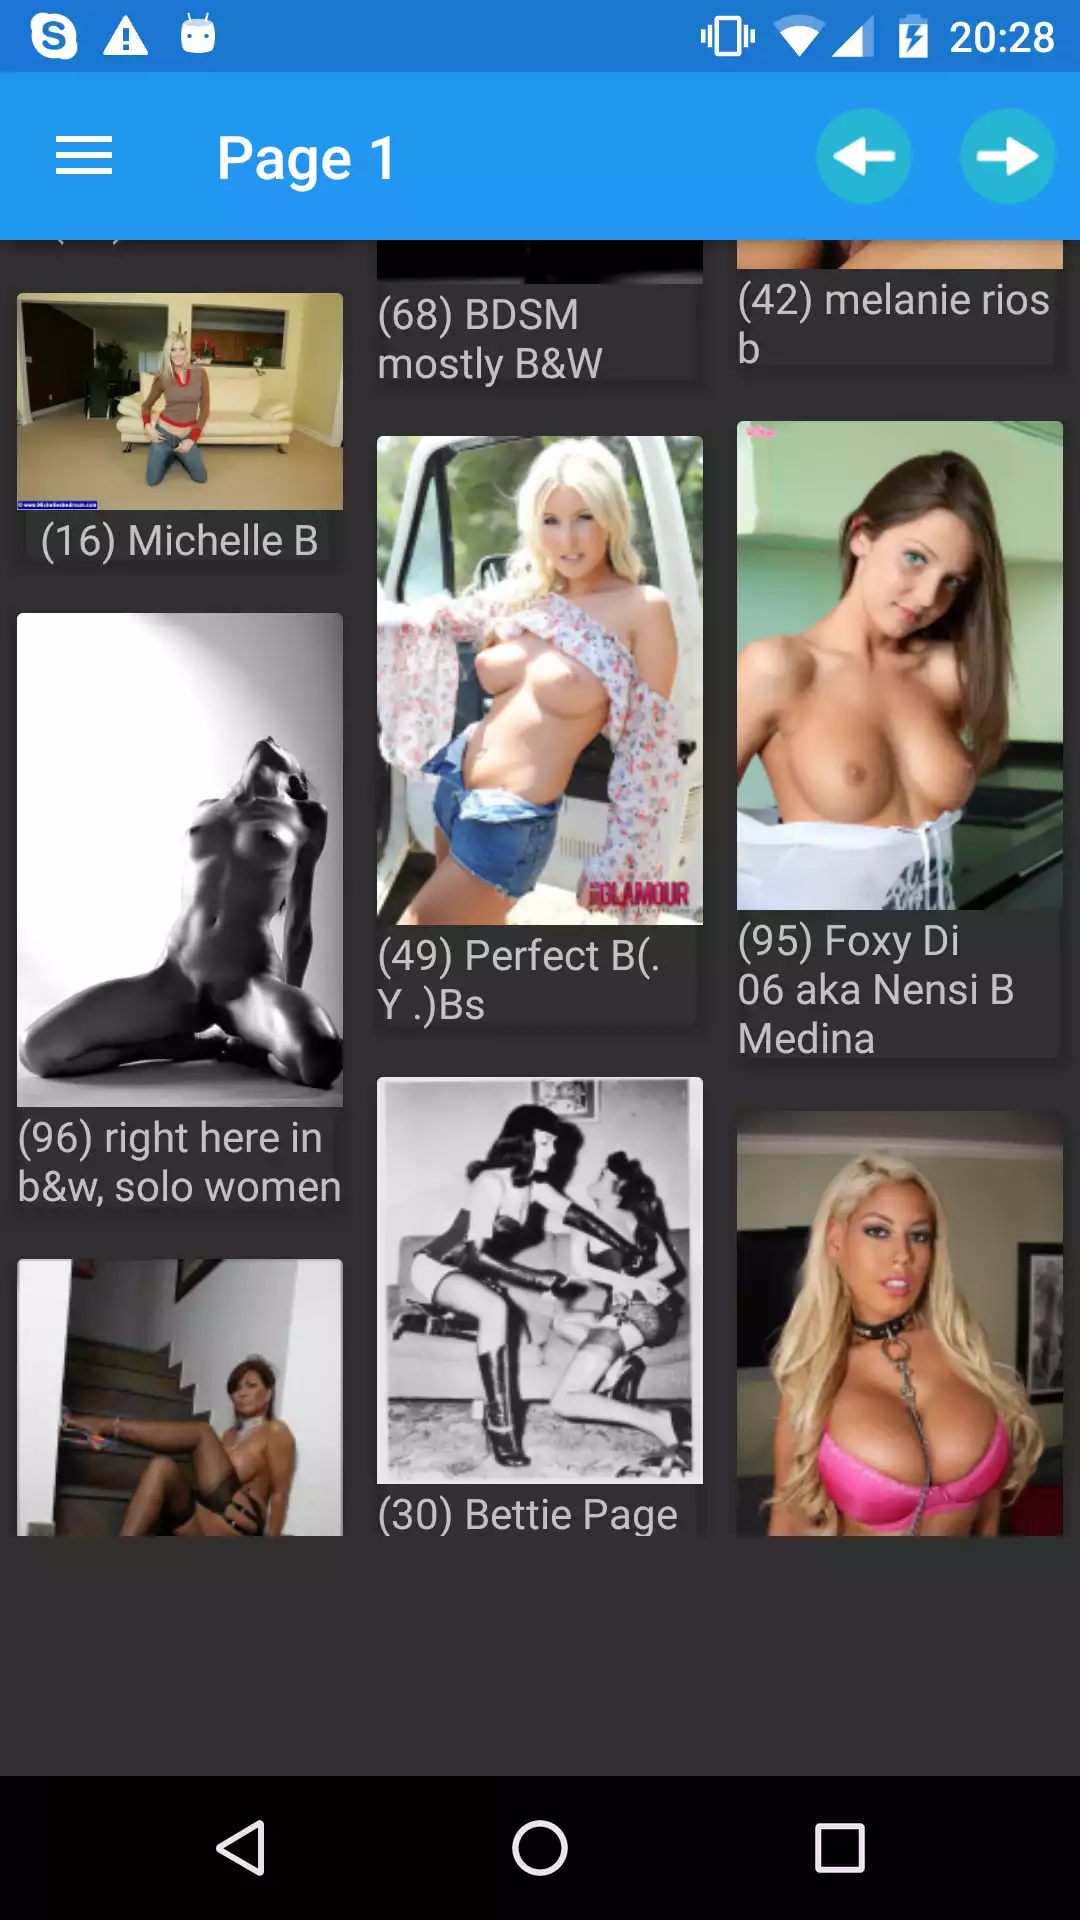 Hayley Galleries pics,best,excuses,aplikasi,photo,app,watching,hot,alexis,henti,gallary,hentai,gallery,sexy,download,porn,galleries,apps,for,hebtai,pornstars,apk,android,texas